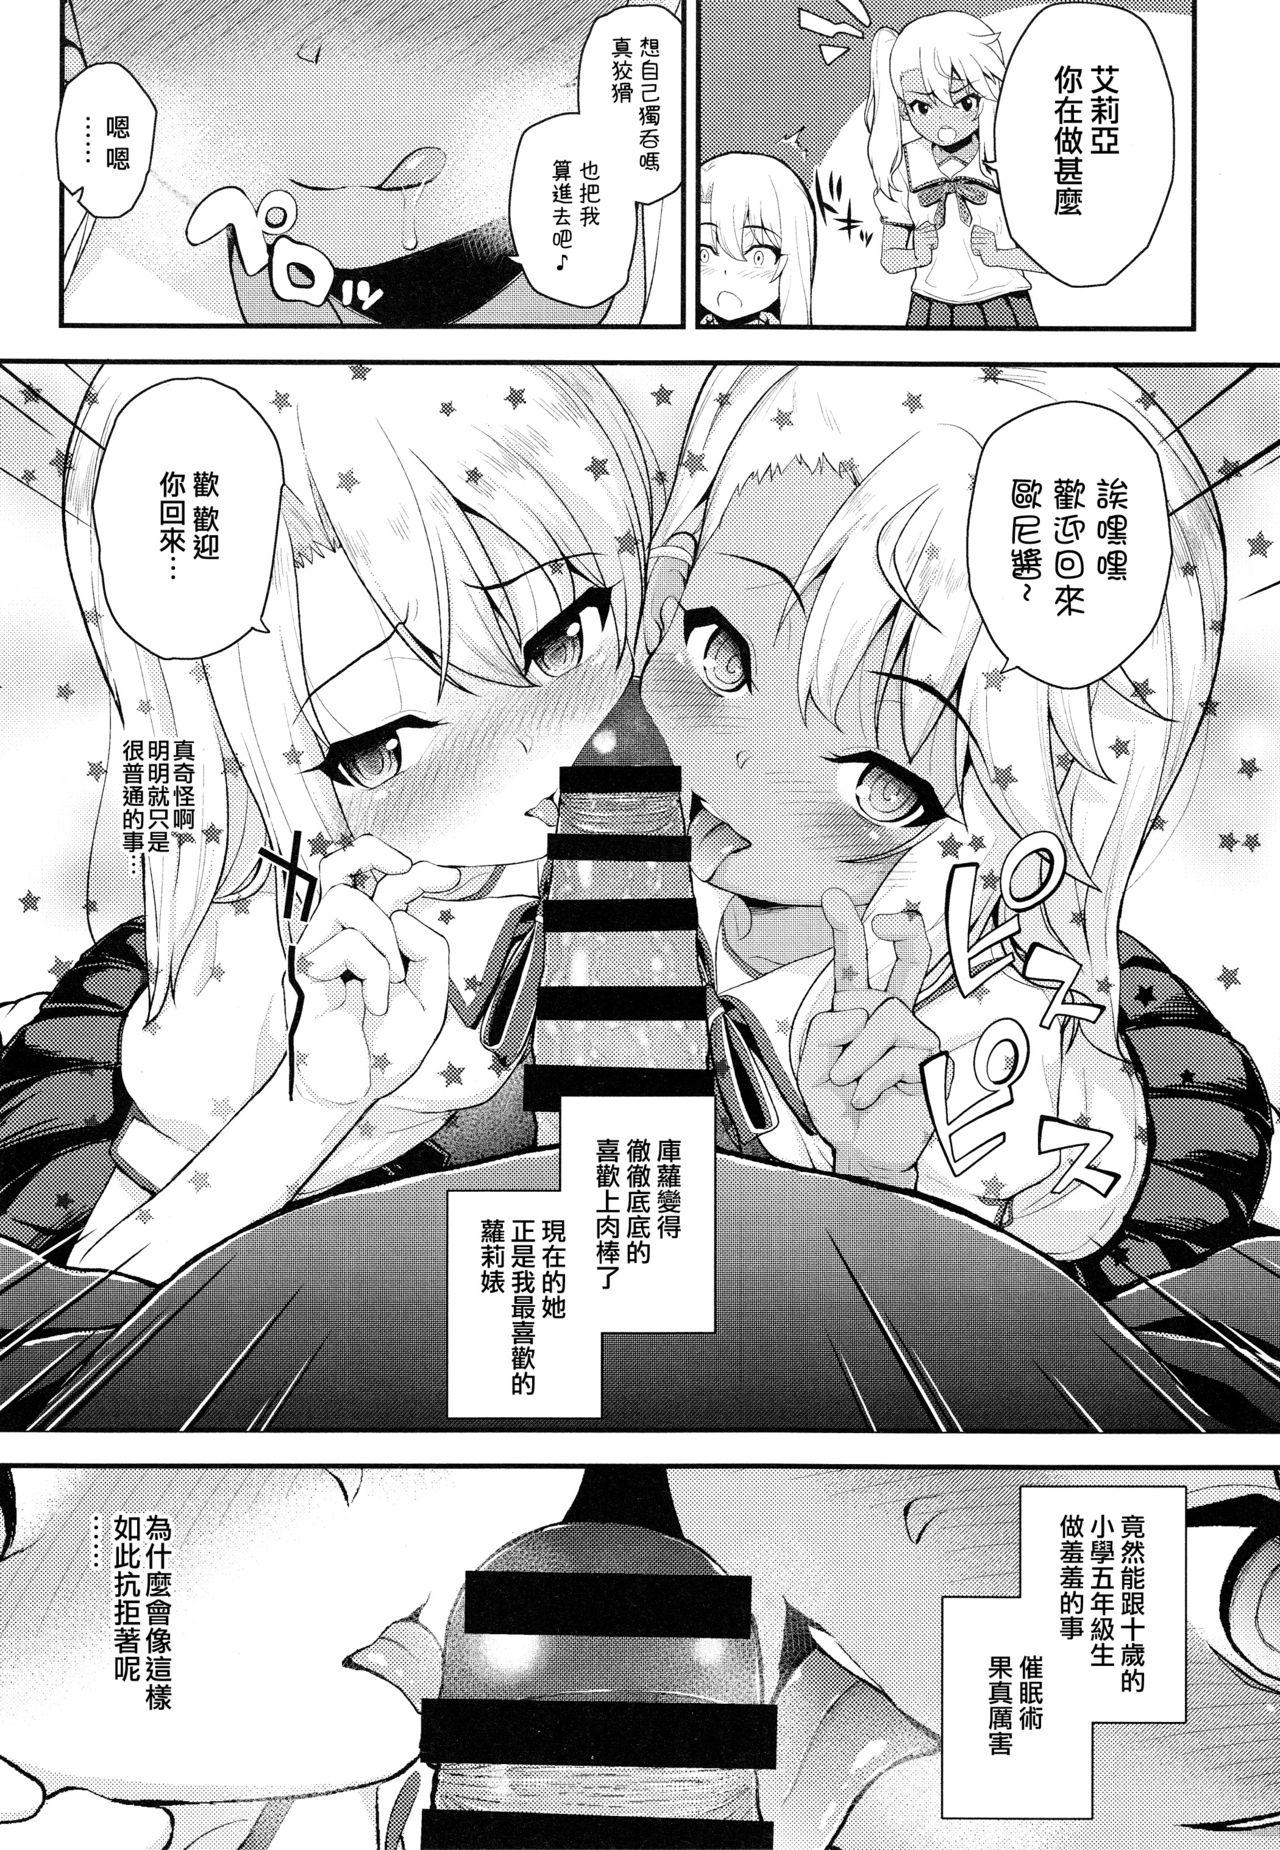 Funny Saimin Choukyou Diary - Fate kaleid liner prisma illya Doctor Sex - Page 6